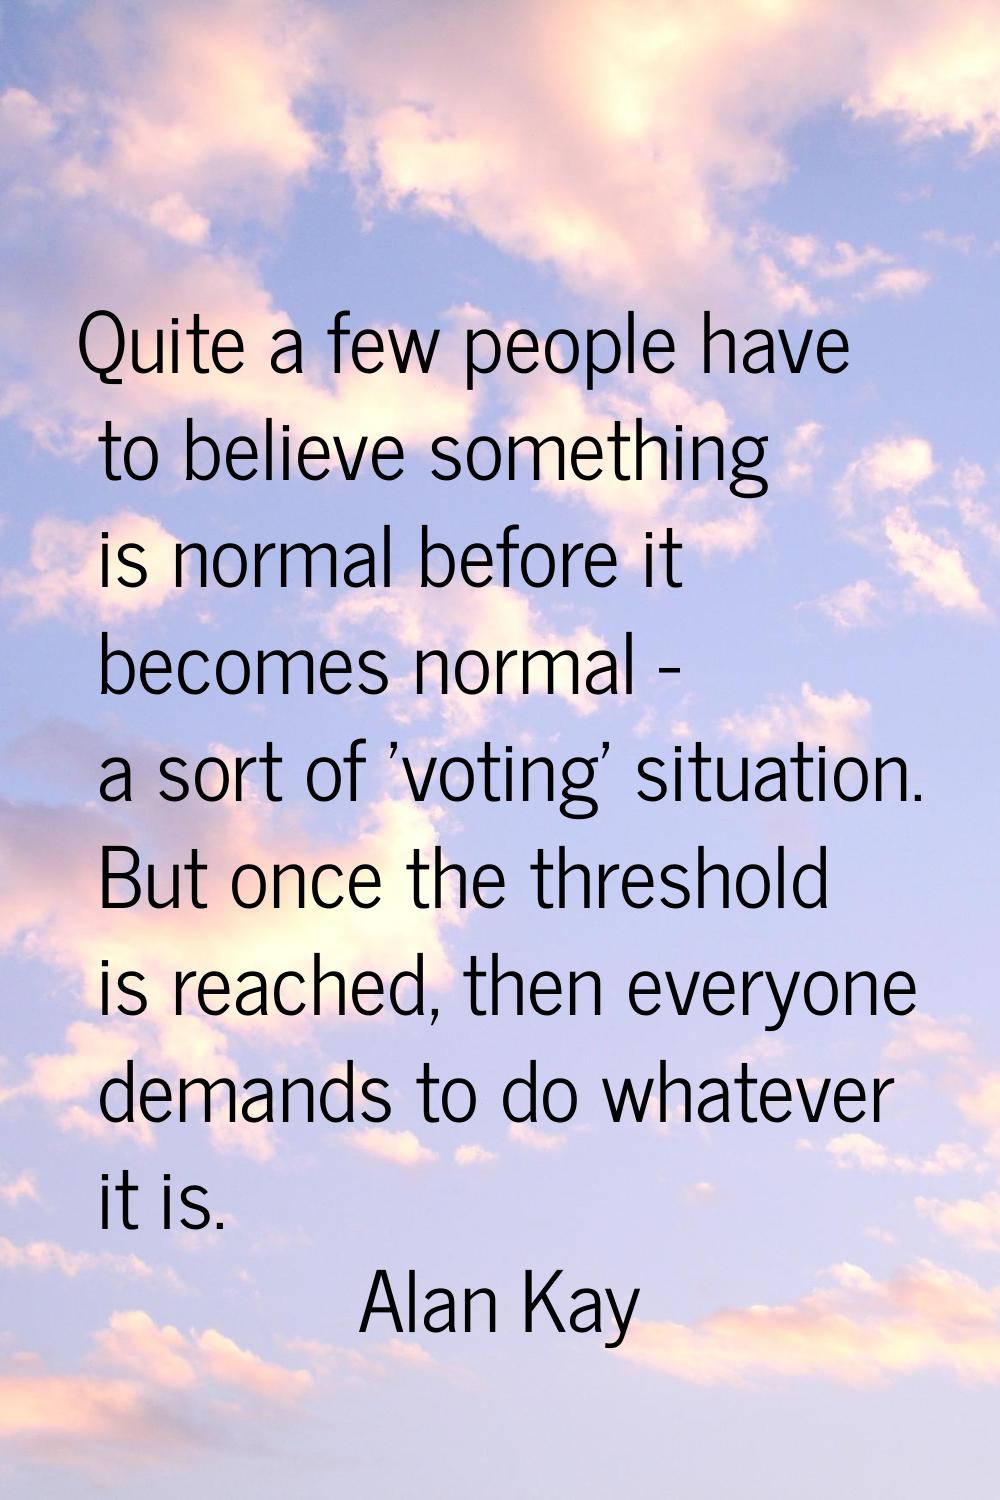 Quite a few people have to believe something is normal before it becomes normal - a sort of 'voting